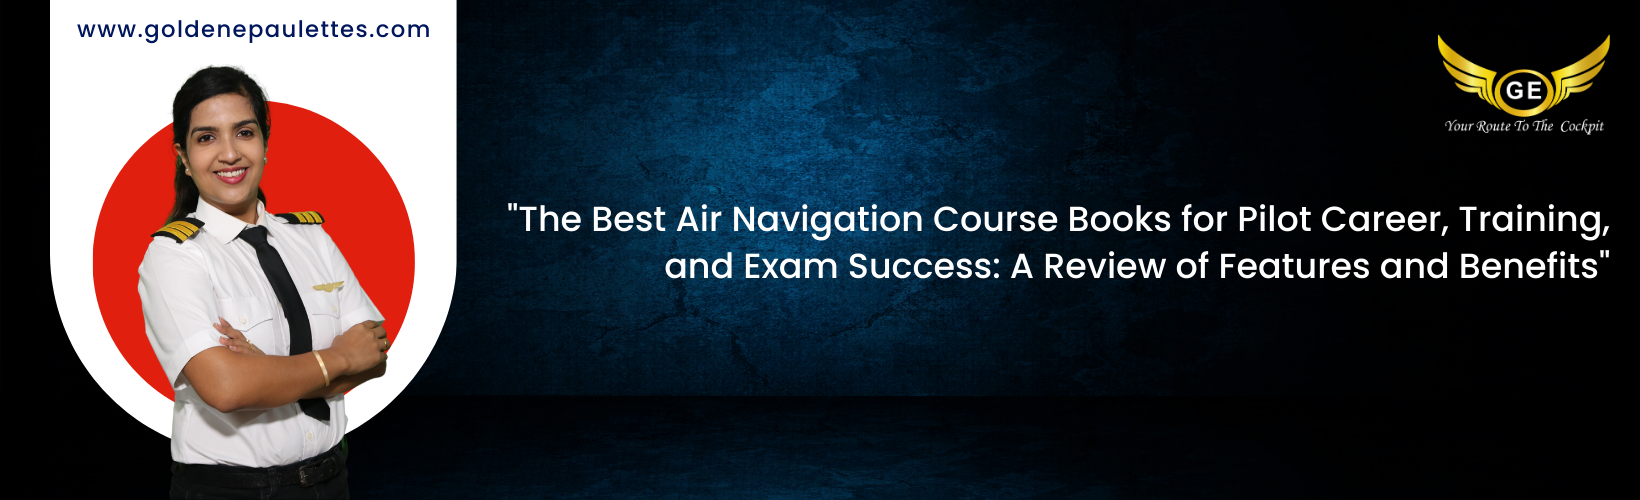 Tips for Passing the Air Navigation Course Exam